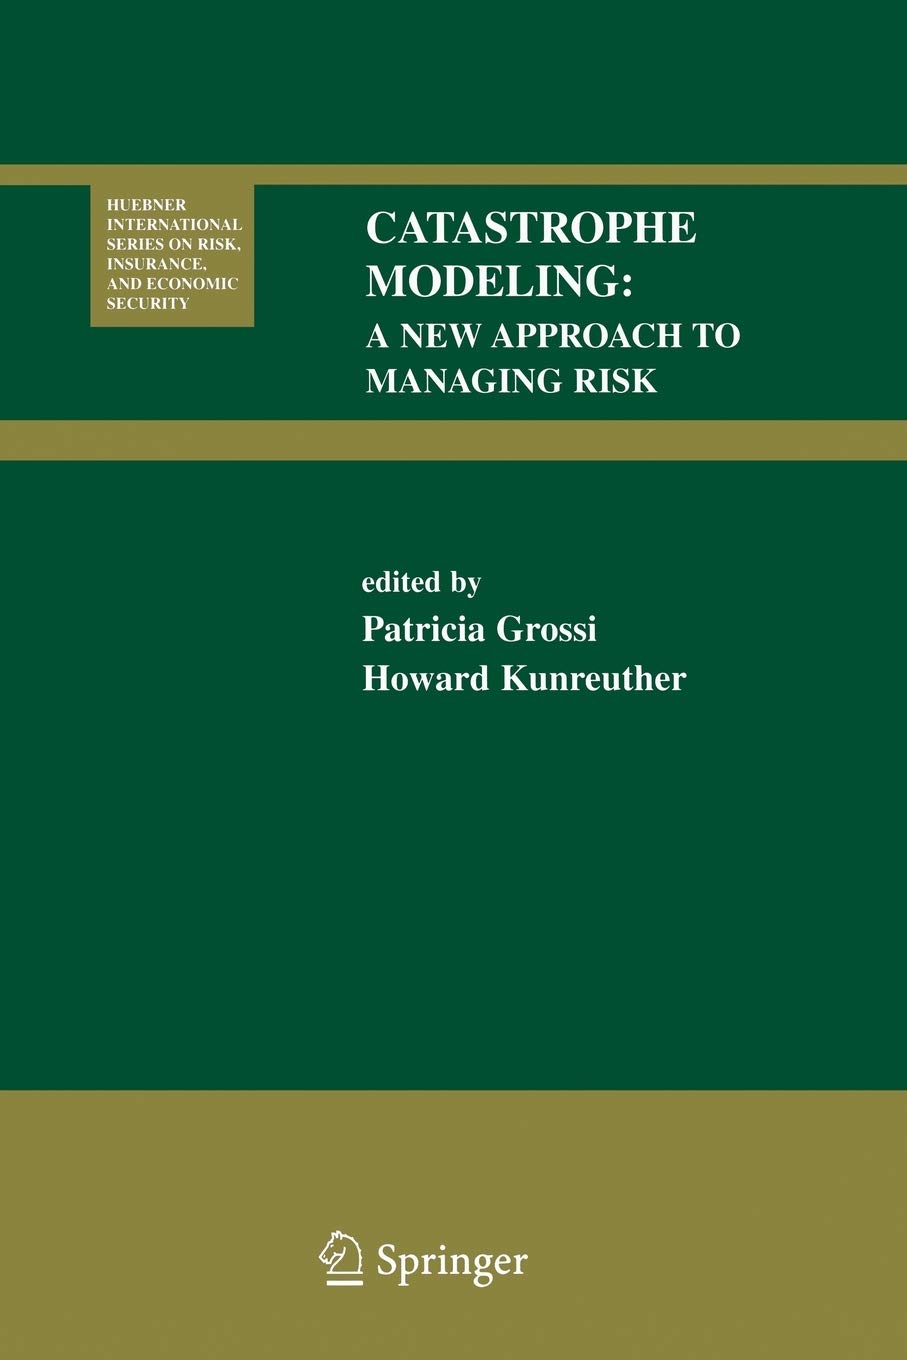 Catastrophe Modeling: A New Approach to Managing Risk (Huebner International Series on Risk, Insurance and Economic Security, 25)